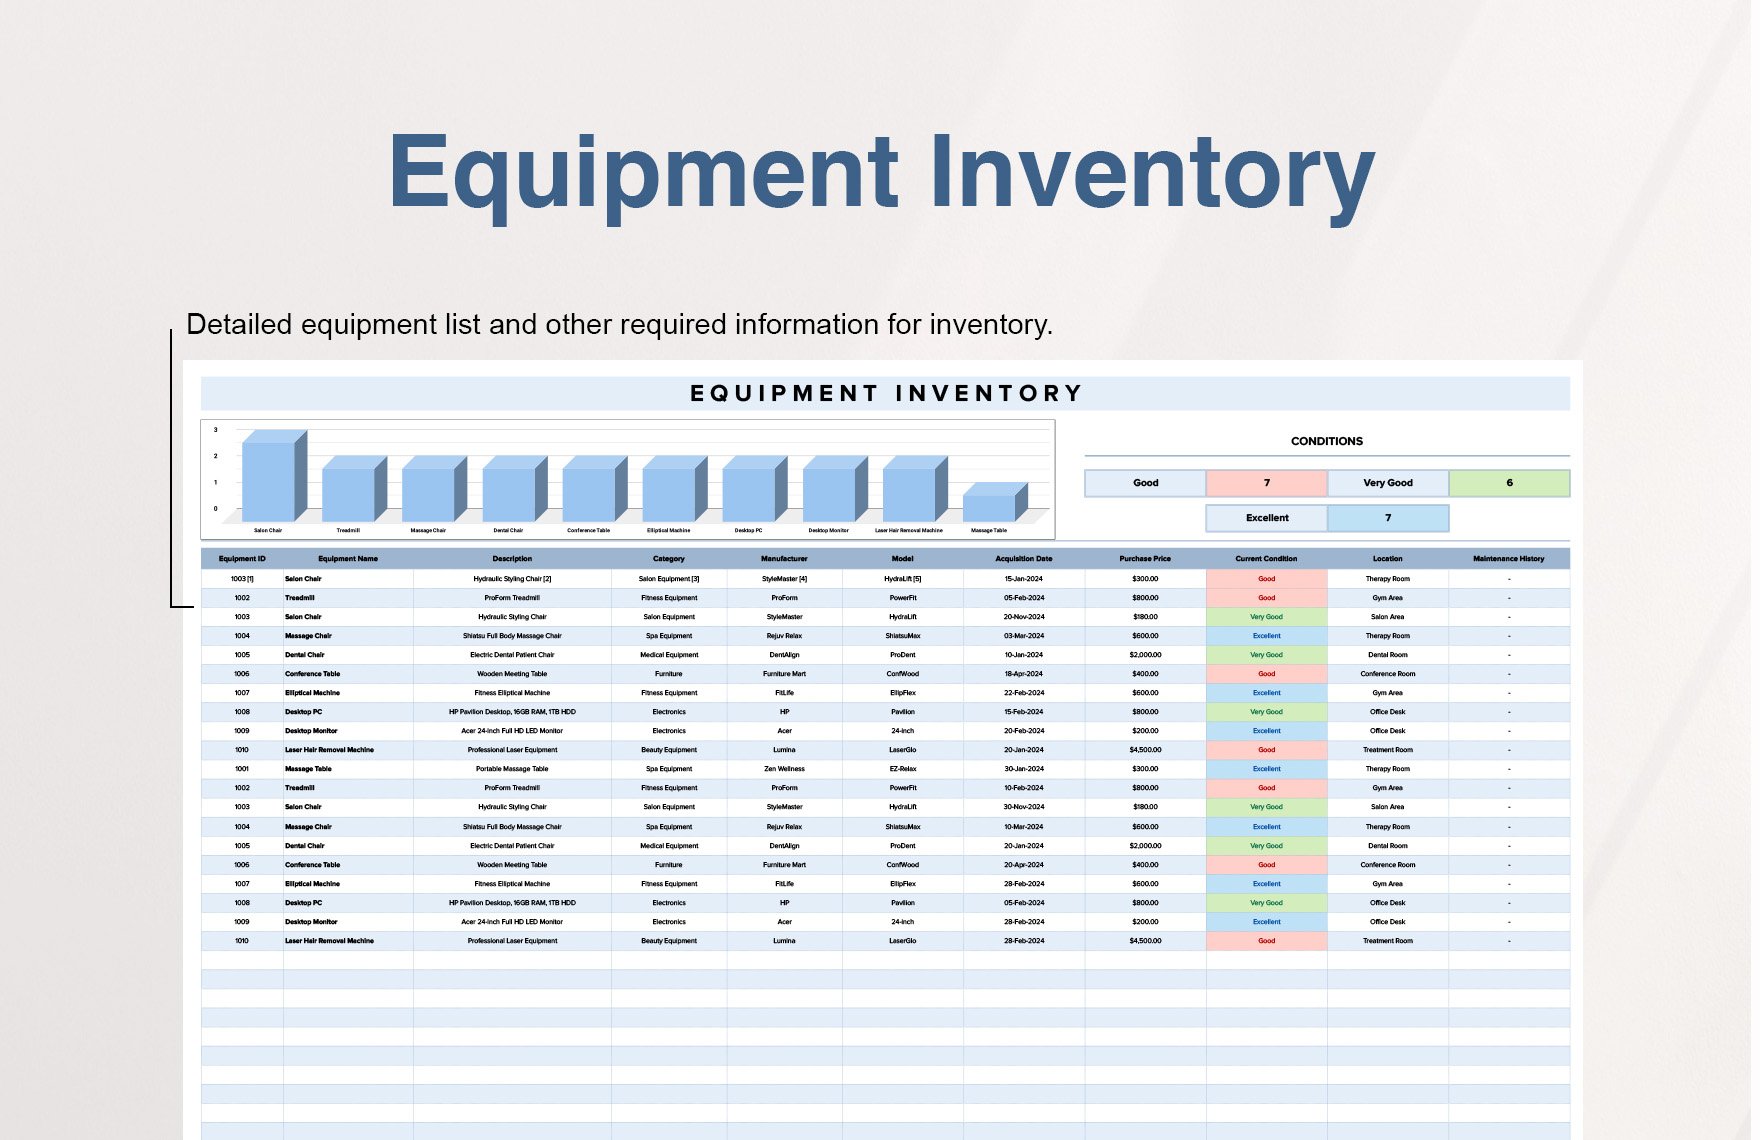 Equipment Inventory Template